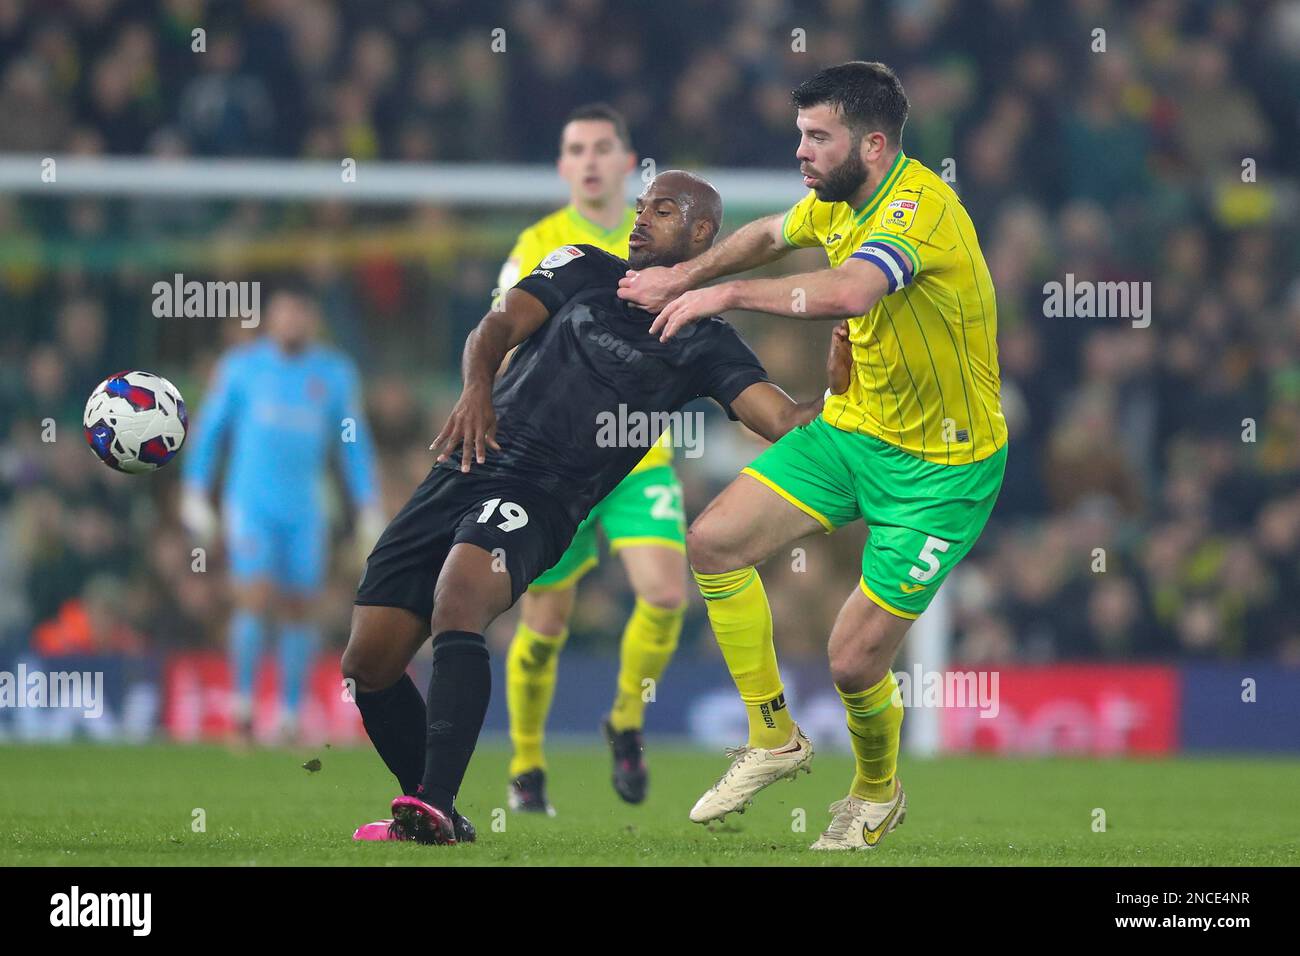 Óscar Estupiñán #19 of Hull City and Grant Hanley #5 of Noriwch City battle for the ball during the Sky Bet Championship match Norwich City vs Hull City at Carrow Road, Norwich, United Kingdom, 14th February 2023  (Photo by Gareth Evans/News Images) Stock Photo